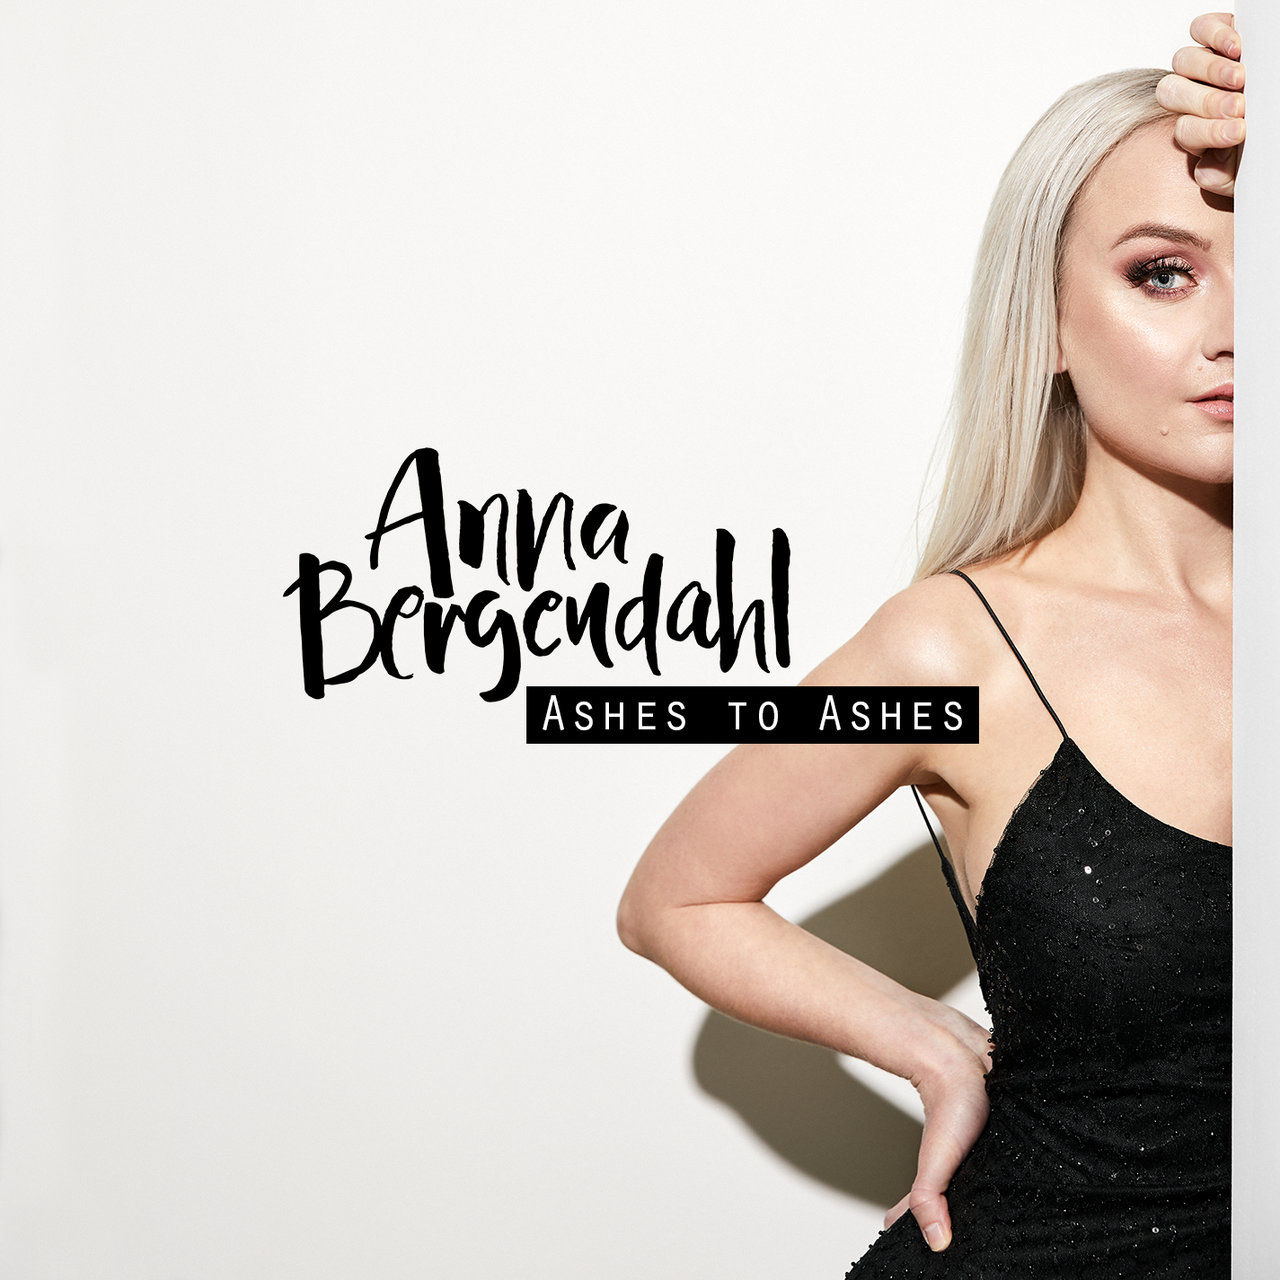 Anna Bergendahl Ashes To Ashes cover artwork